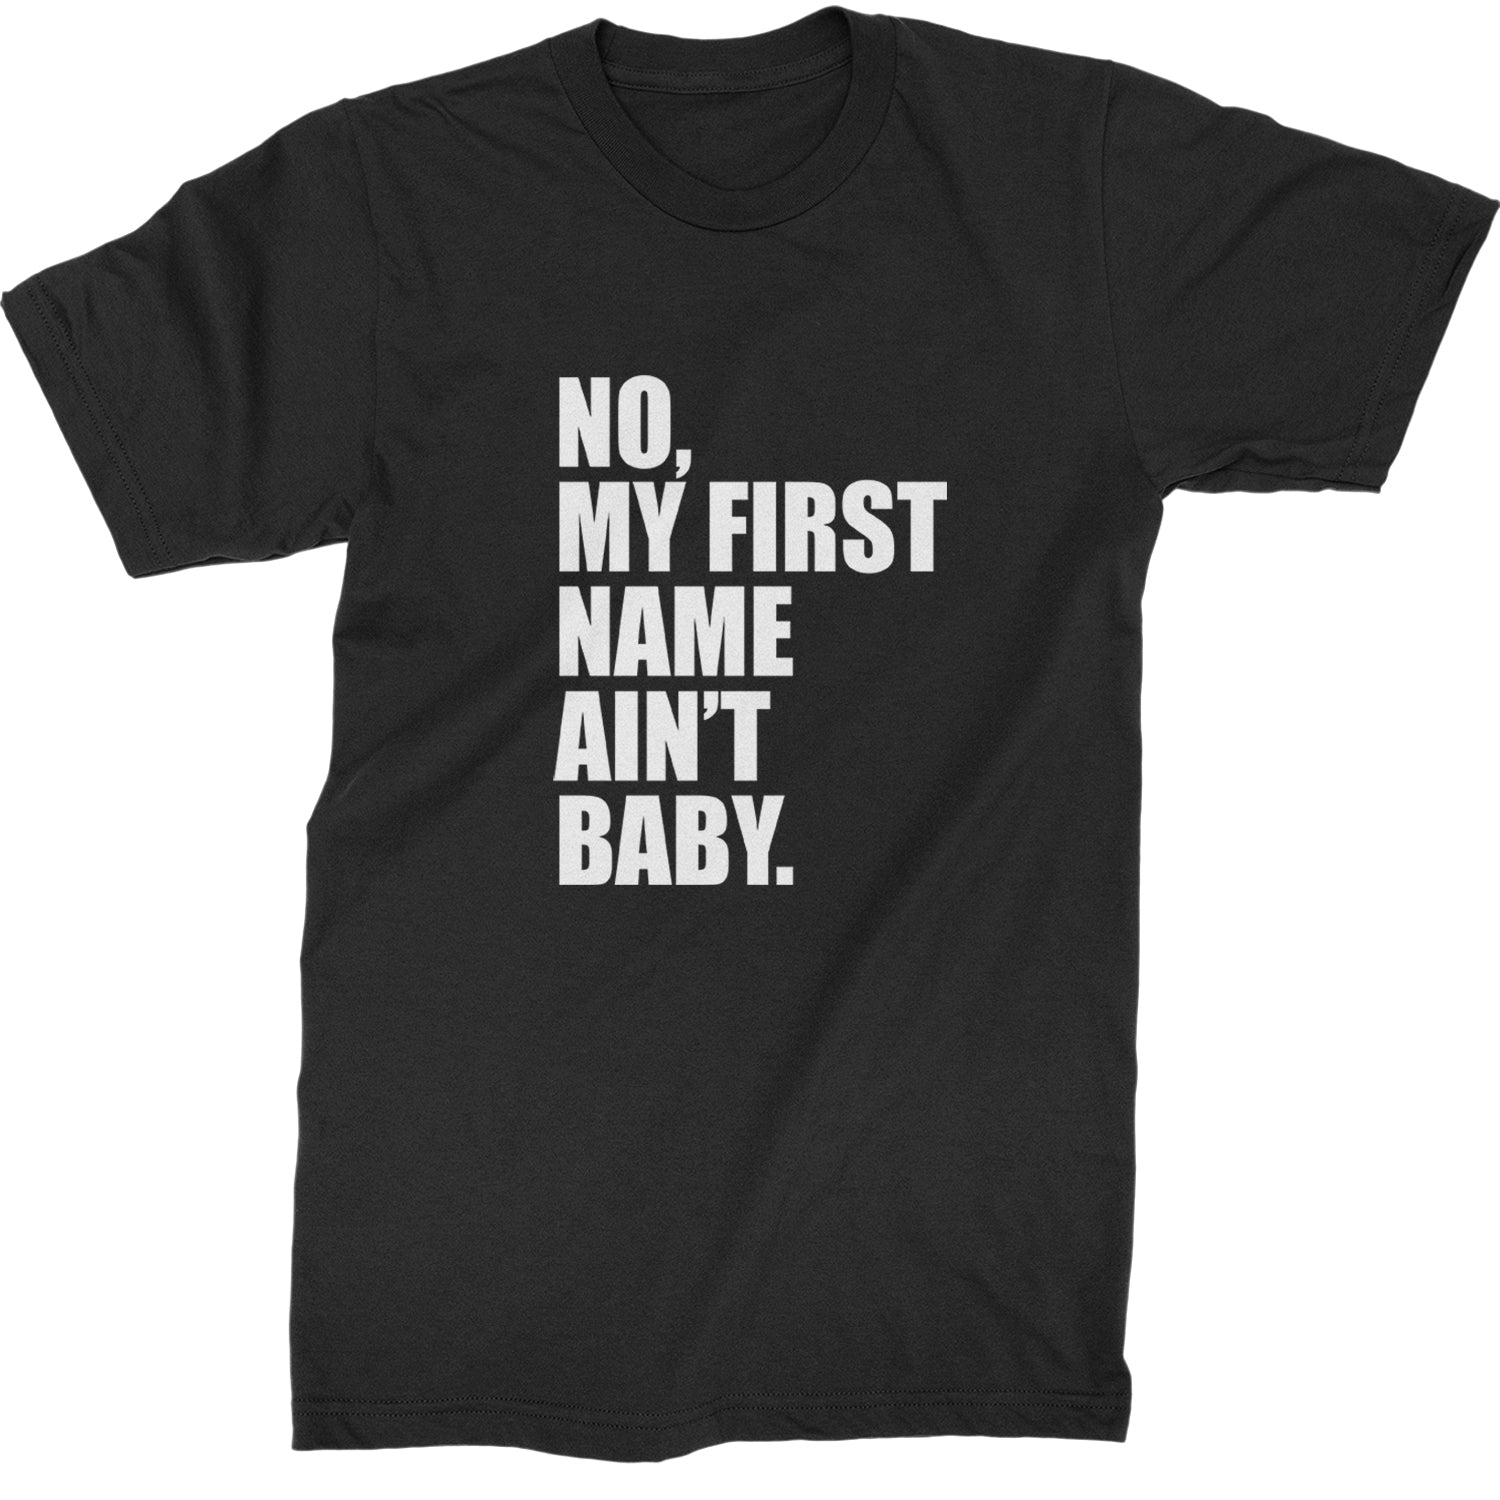 No My First Name Ain't Baby Together Again Mens T-shirt